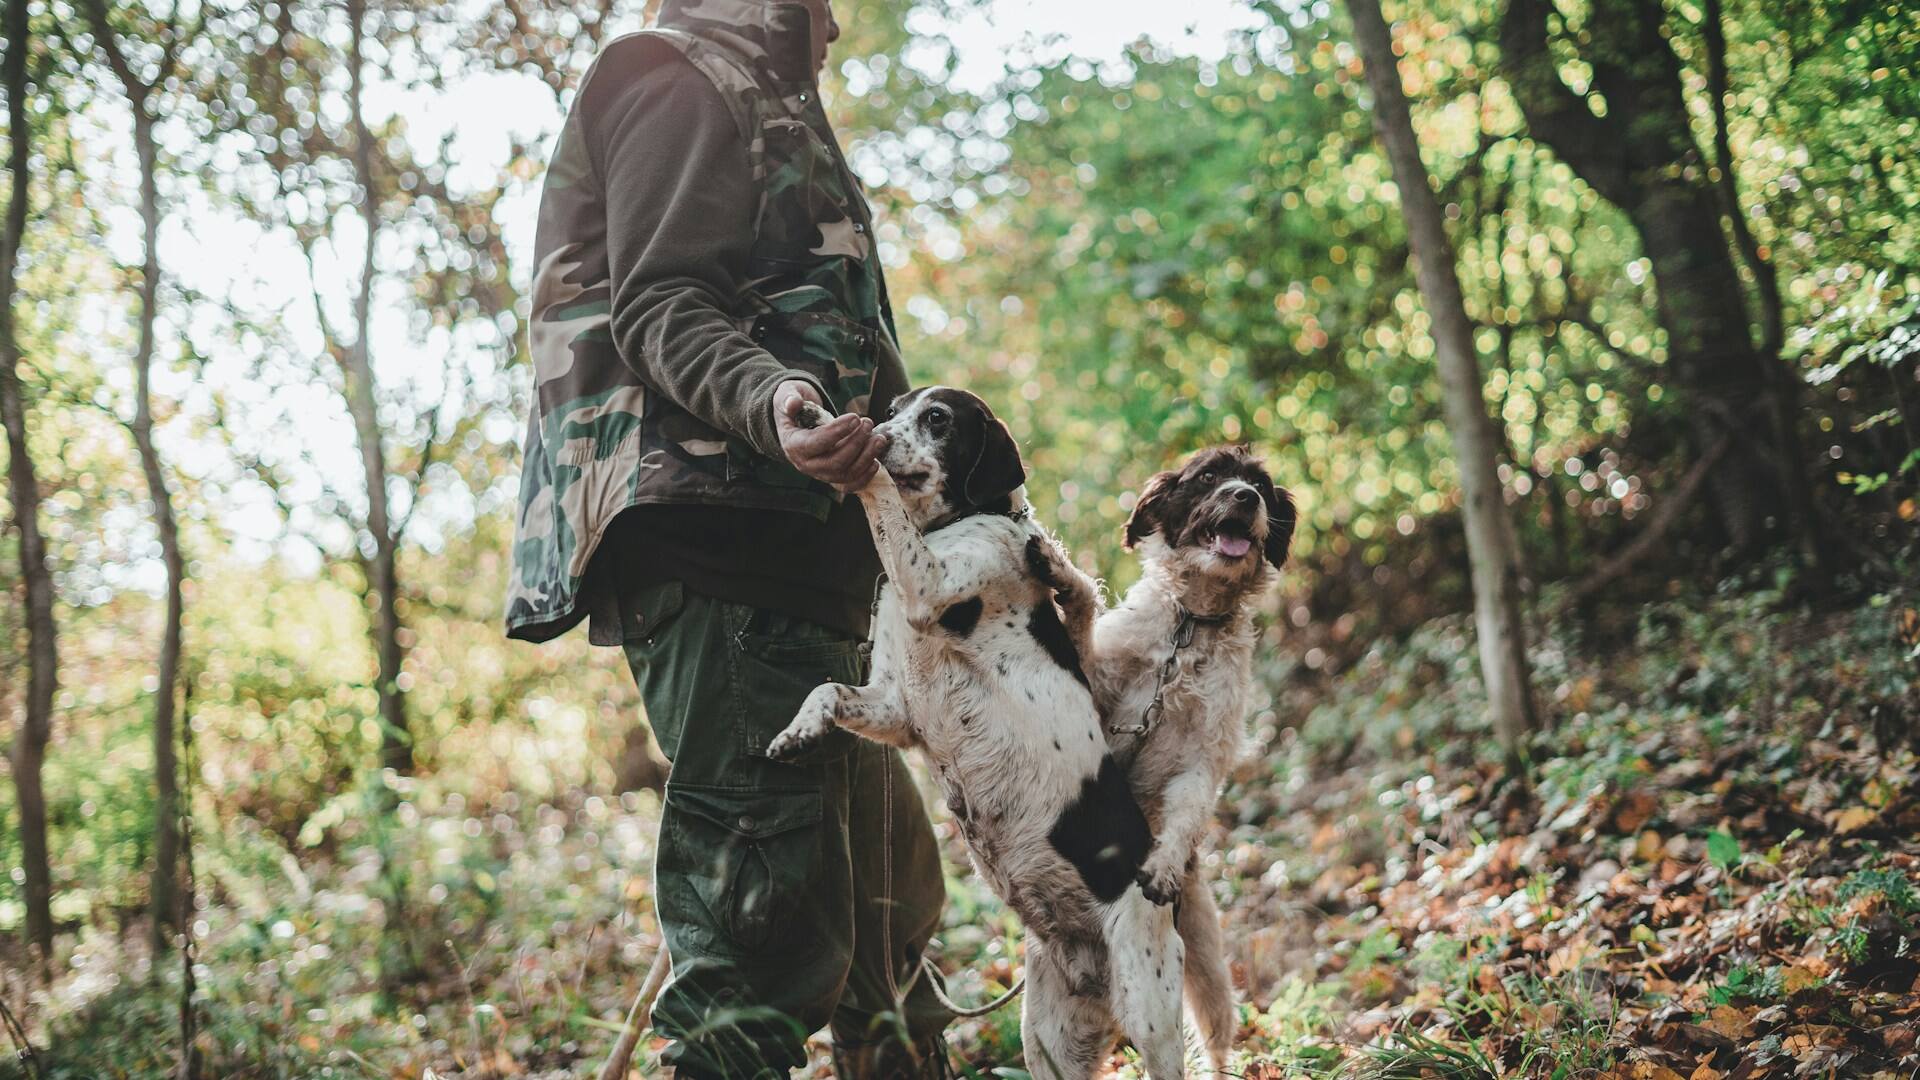 A pair of Irish Setters out in the woods with a man in hunting gear